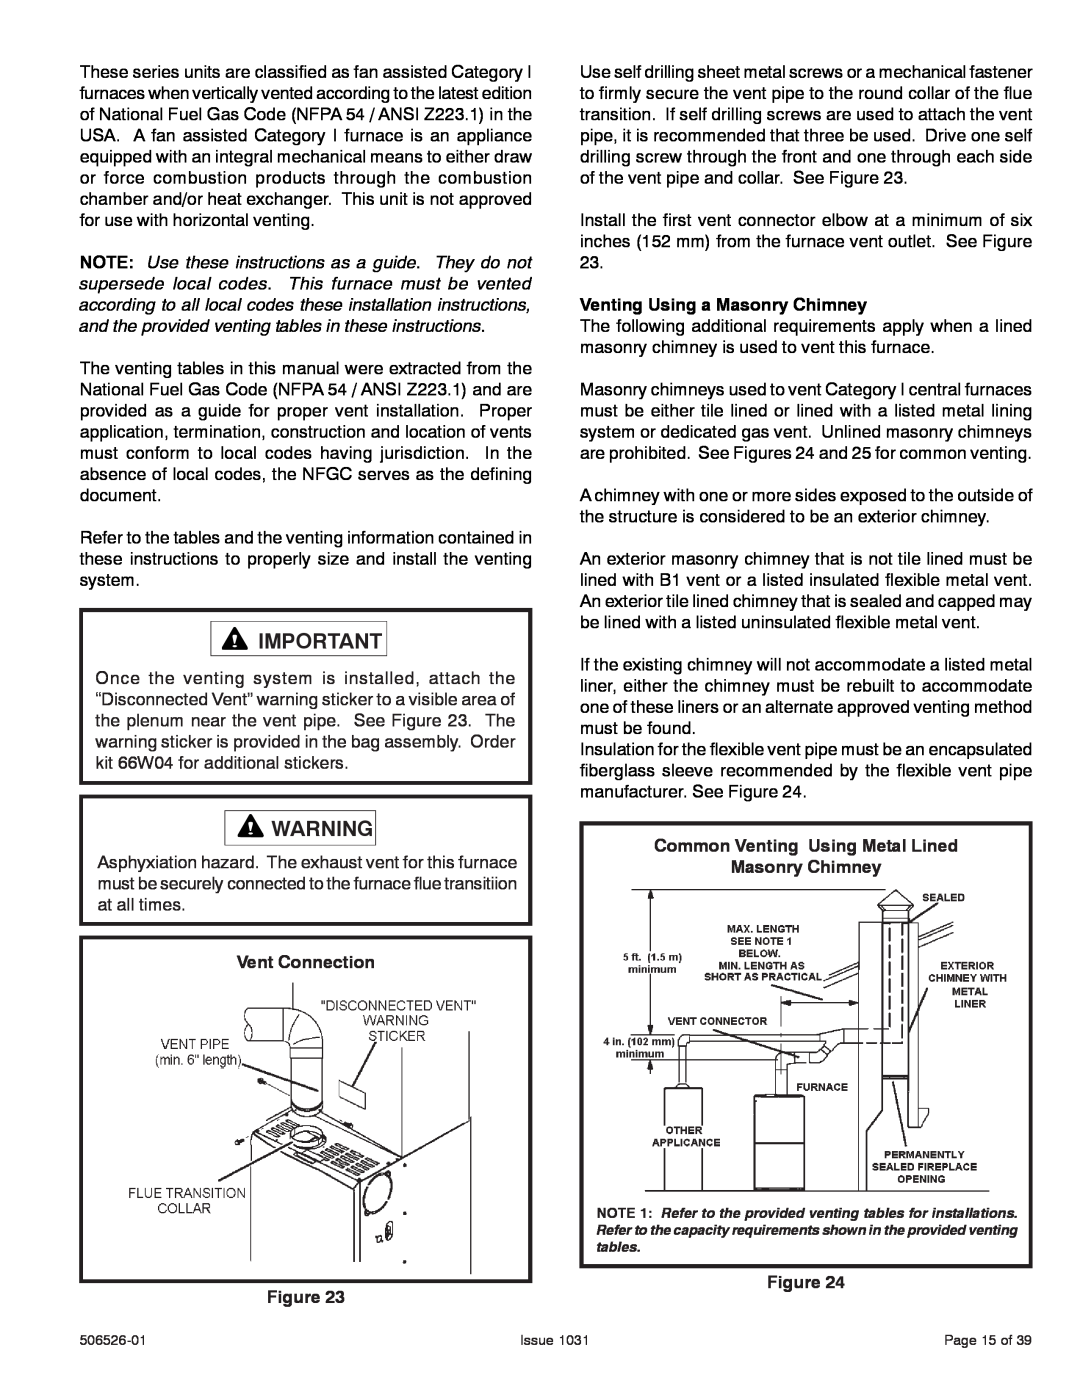 Allied Air Enterprises 80G1UH, A80UH Vent Connection Figure, Venting Using a Masonry Chimney, Issue, Page 15 of 